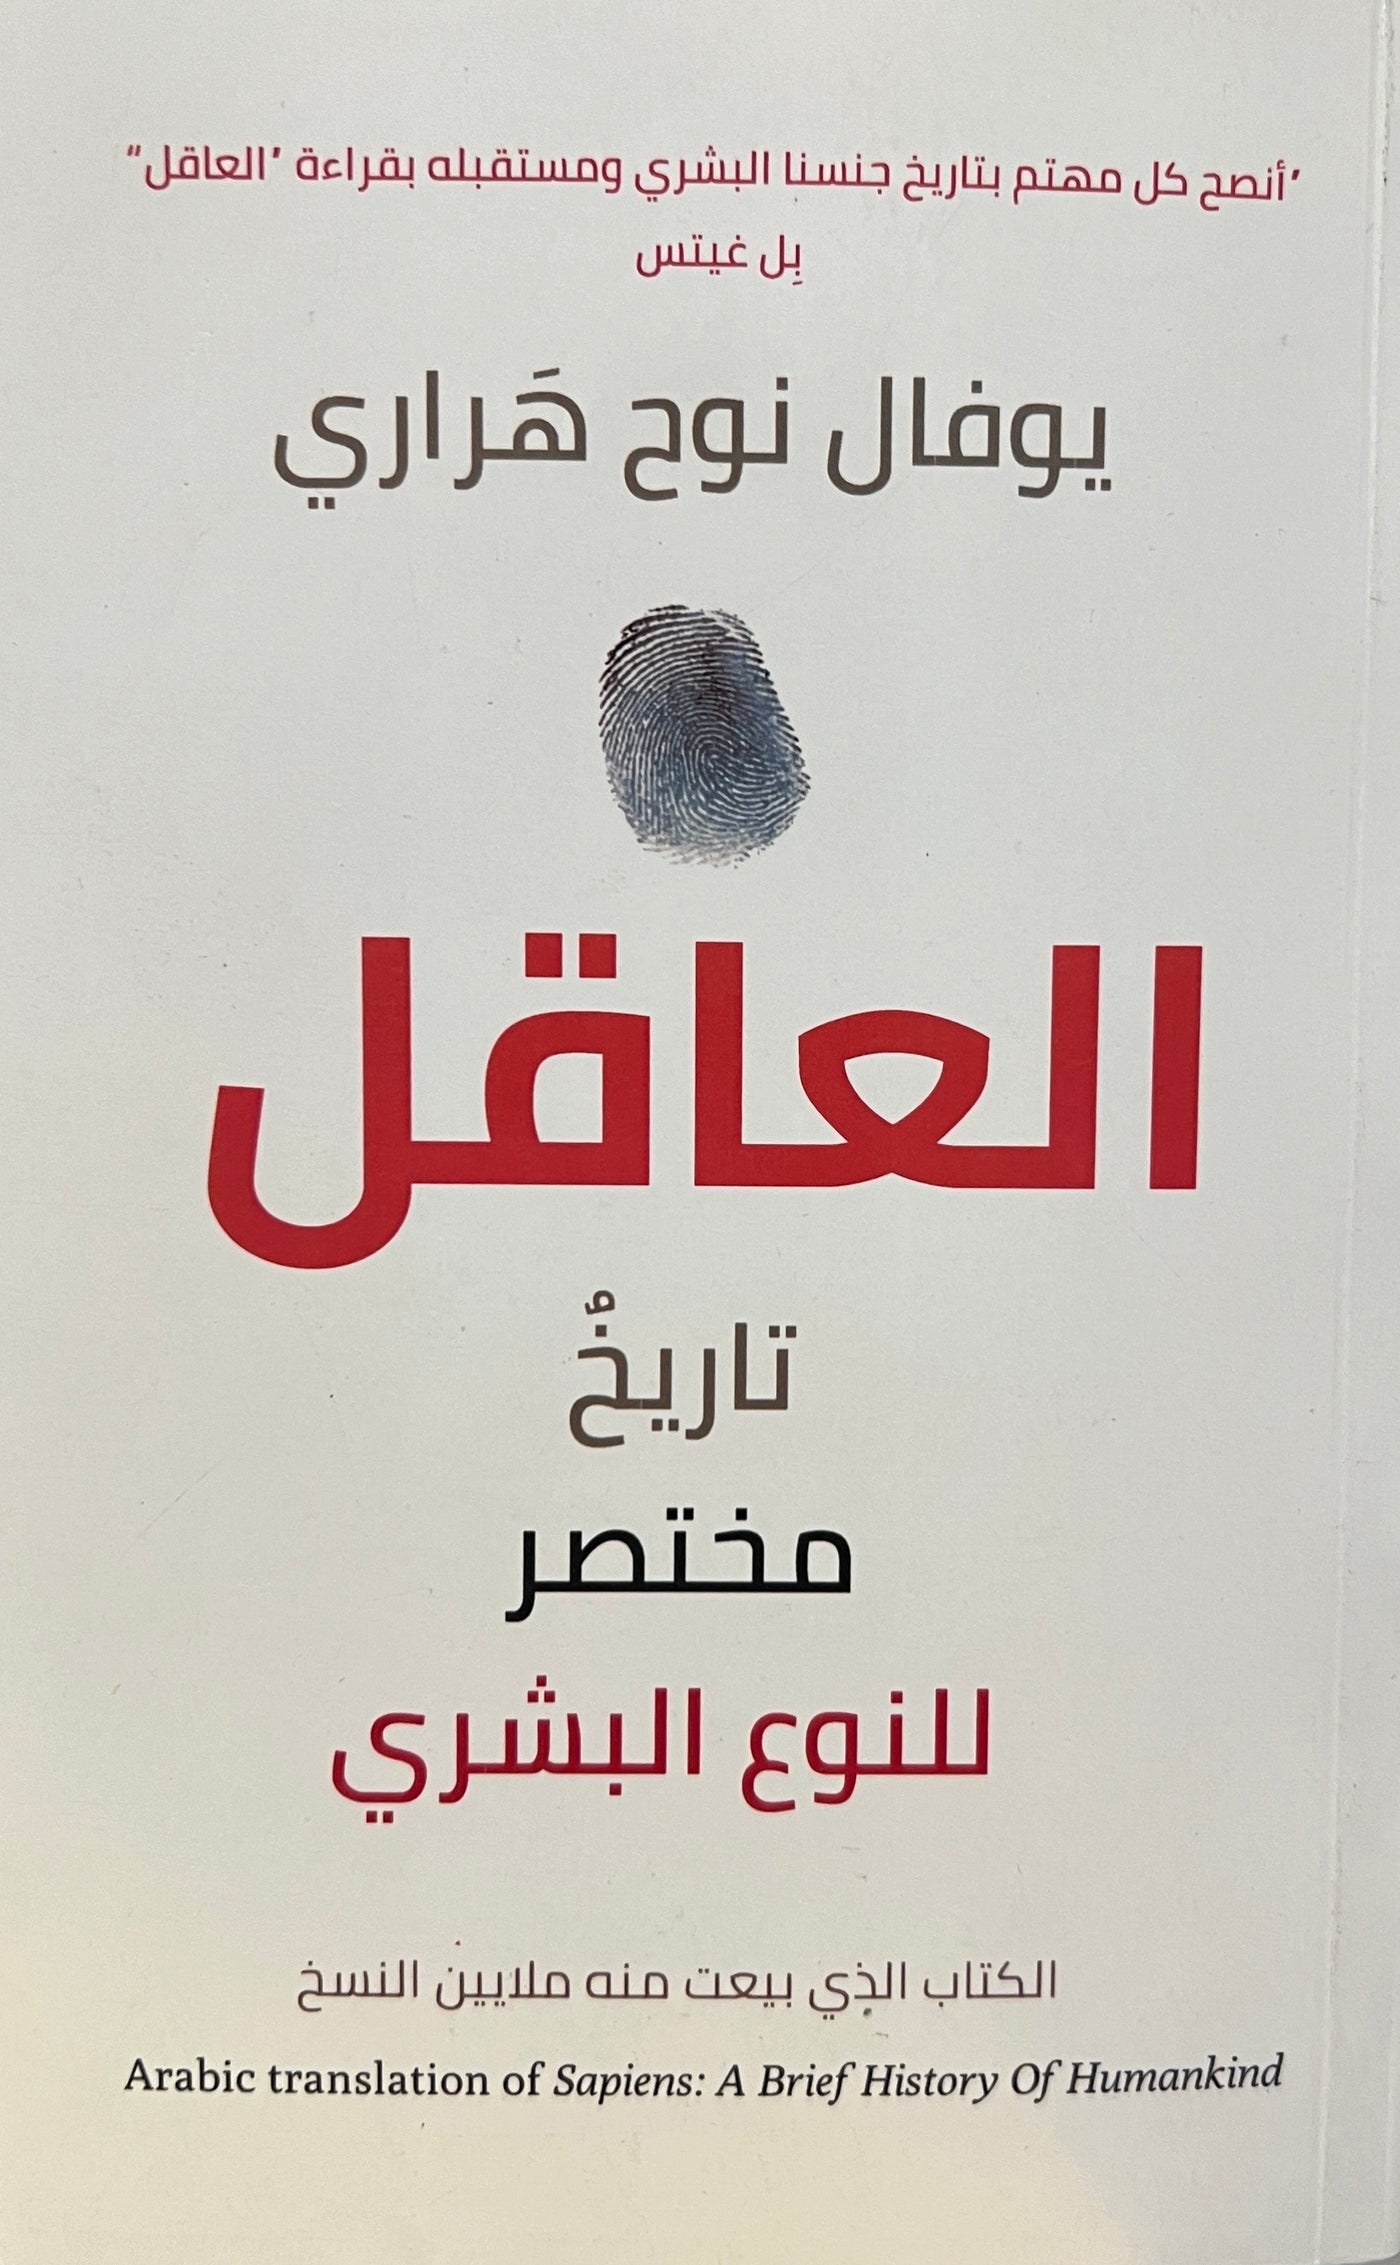 ARABIC TRANSLATION OF SAPIENS: A BRIEF HISTORY OF HUMANKIND